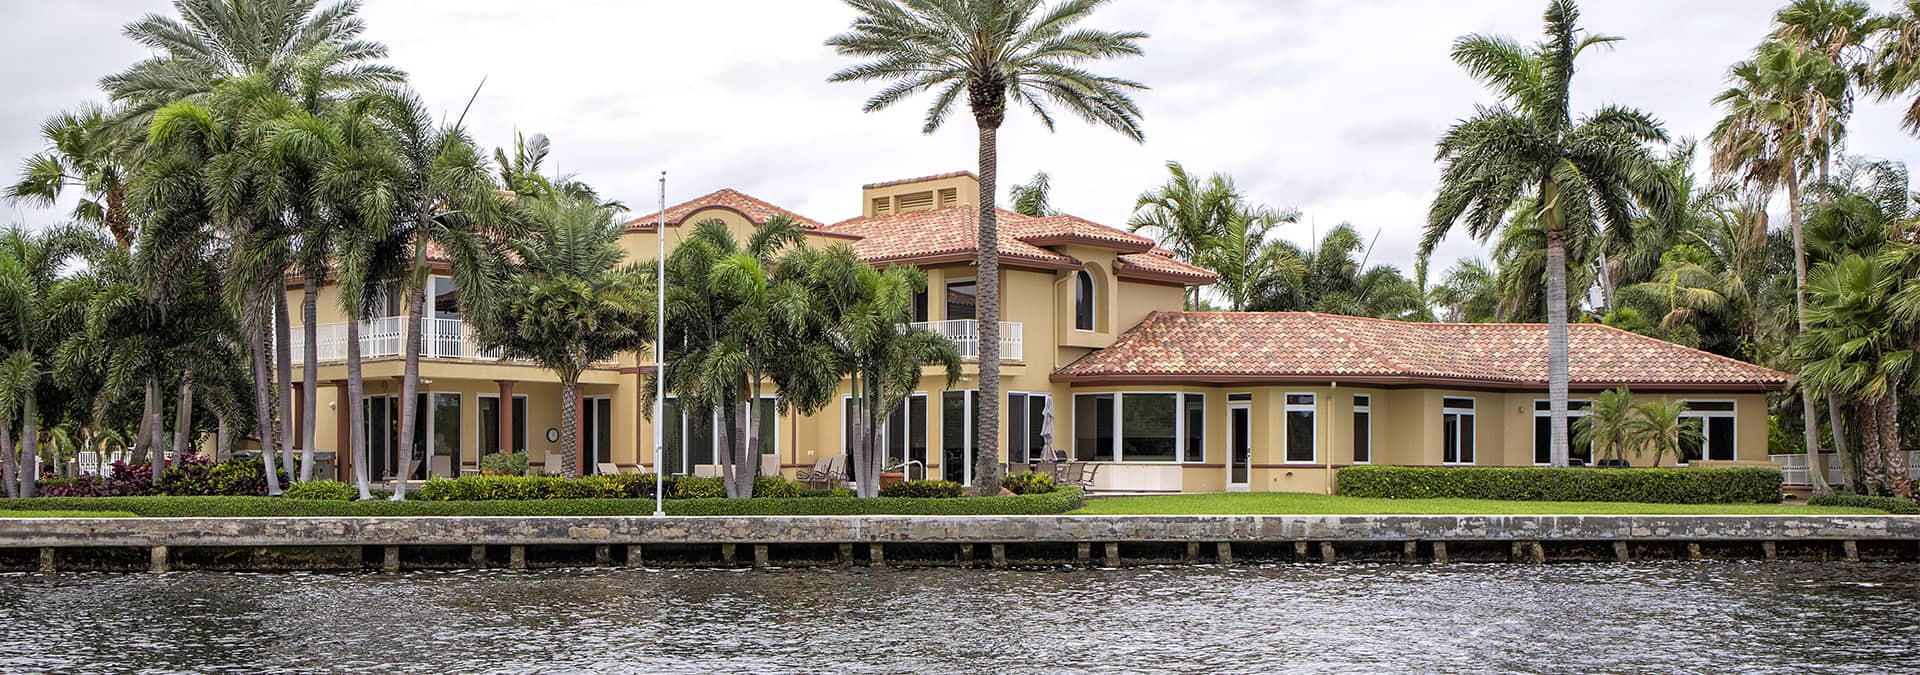 a large waterfront house in middleburg florida